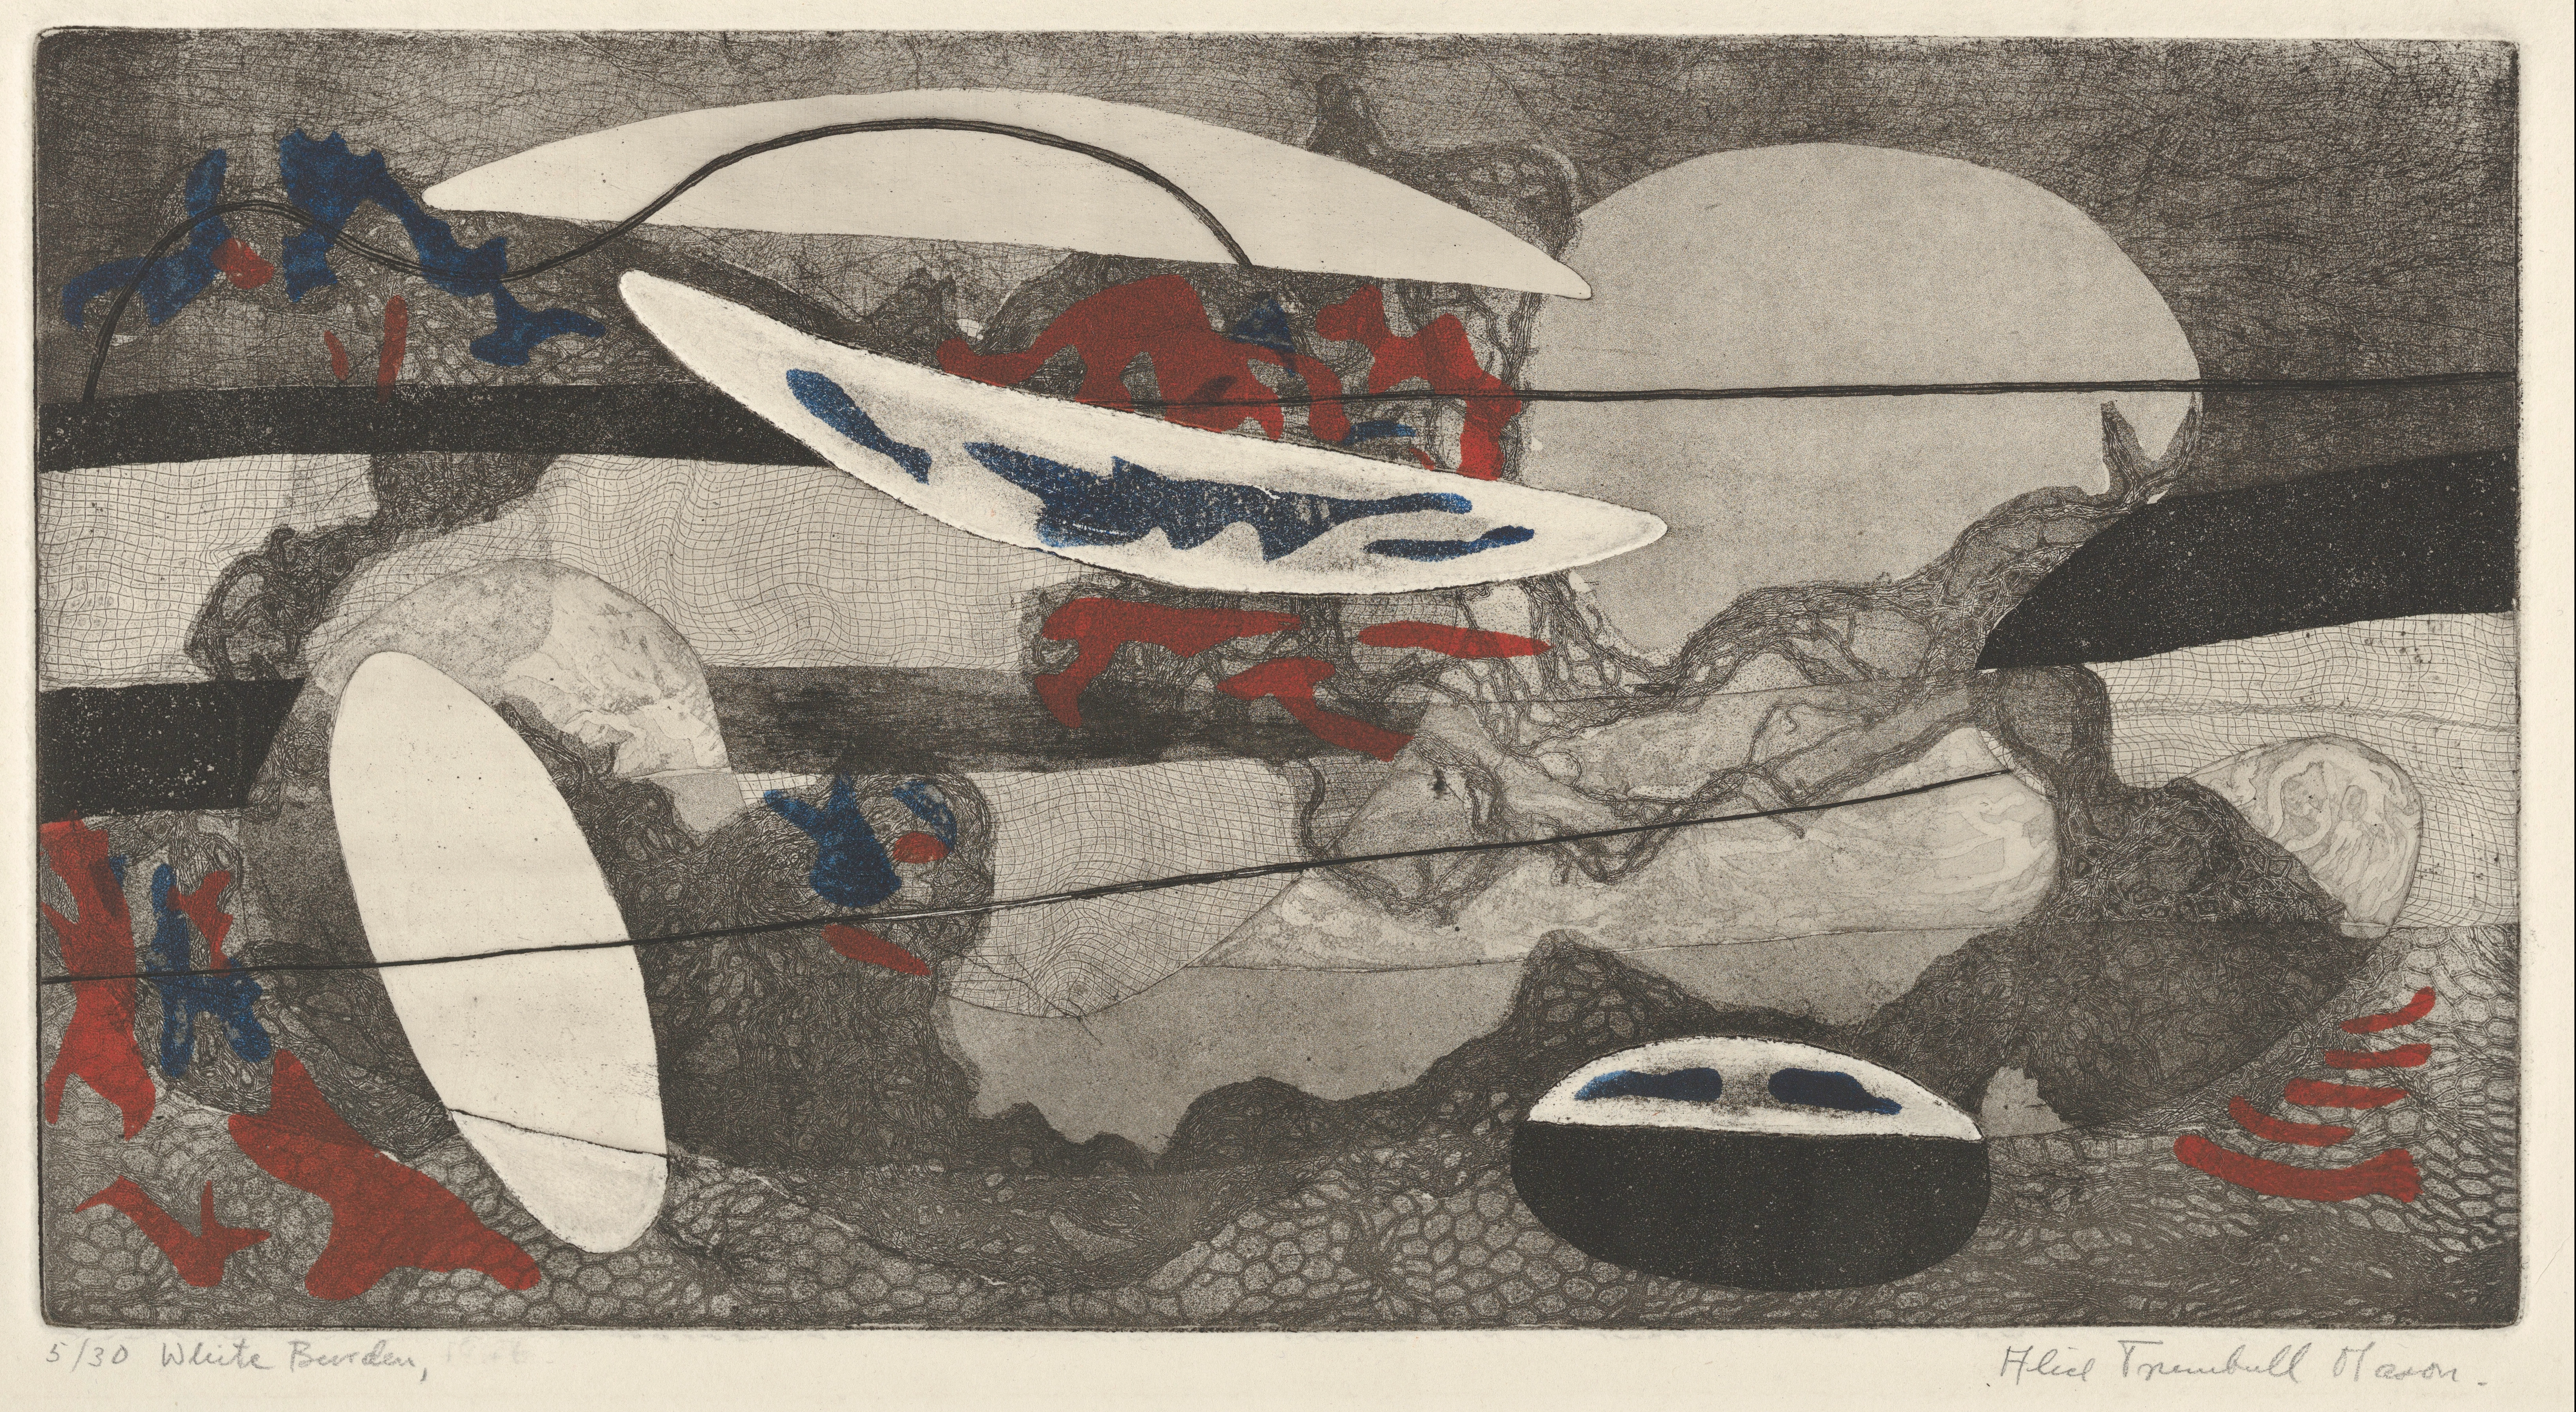 Abstract etching on paper comprised of organic , oblong, white forms. The background is mostly shades of grey, punctuated with a few red and blue markings. Some line work that has been created is net-like.